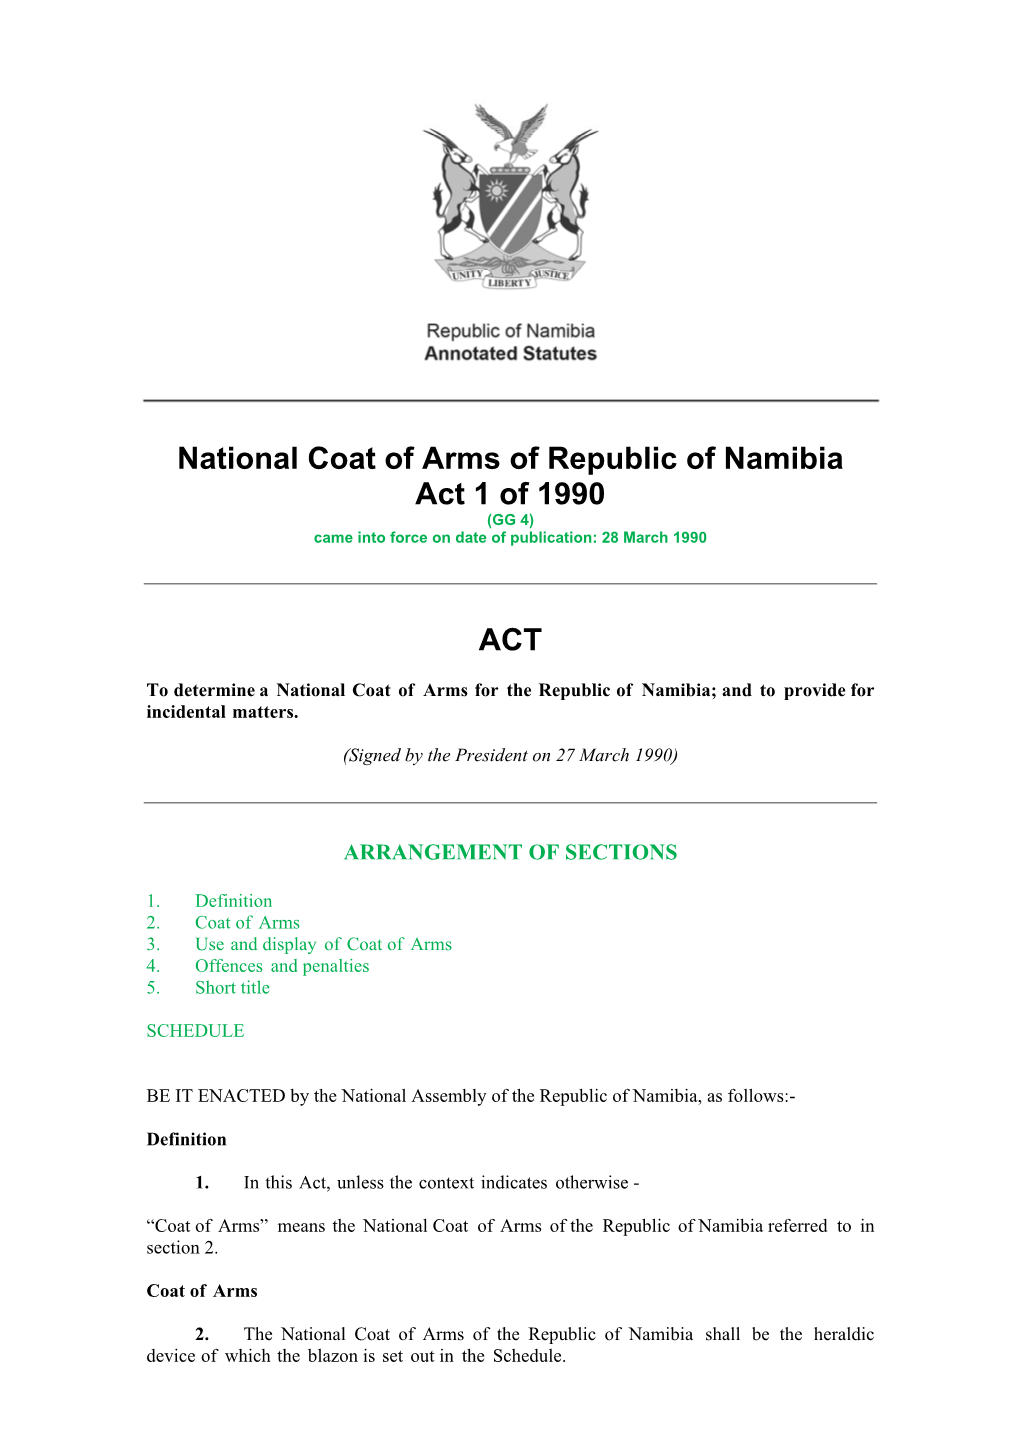 National Coat of Arms of the Republic of Namibia Act 1 of 1990